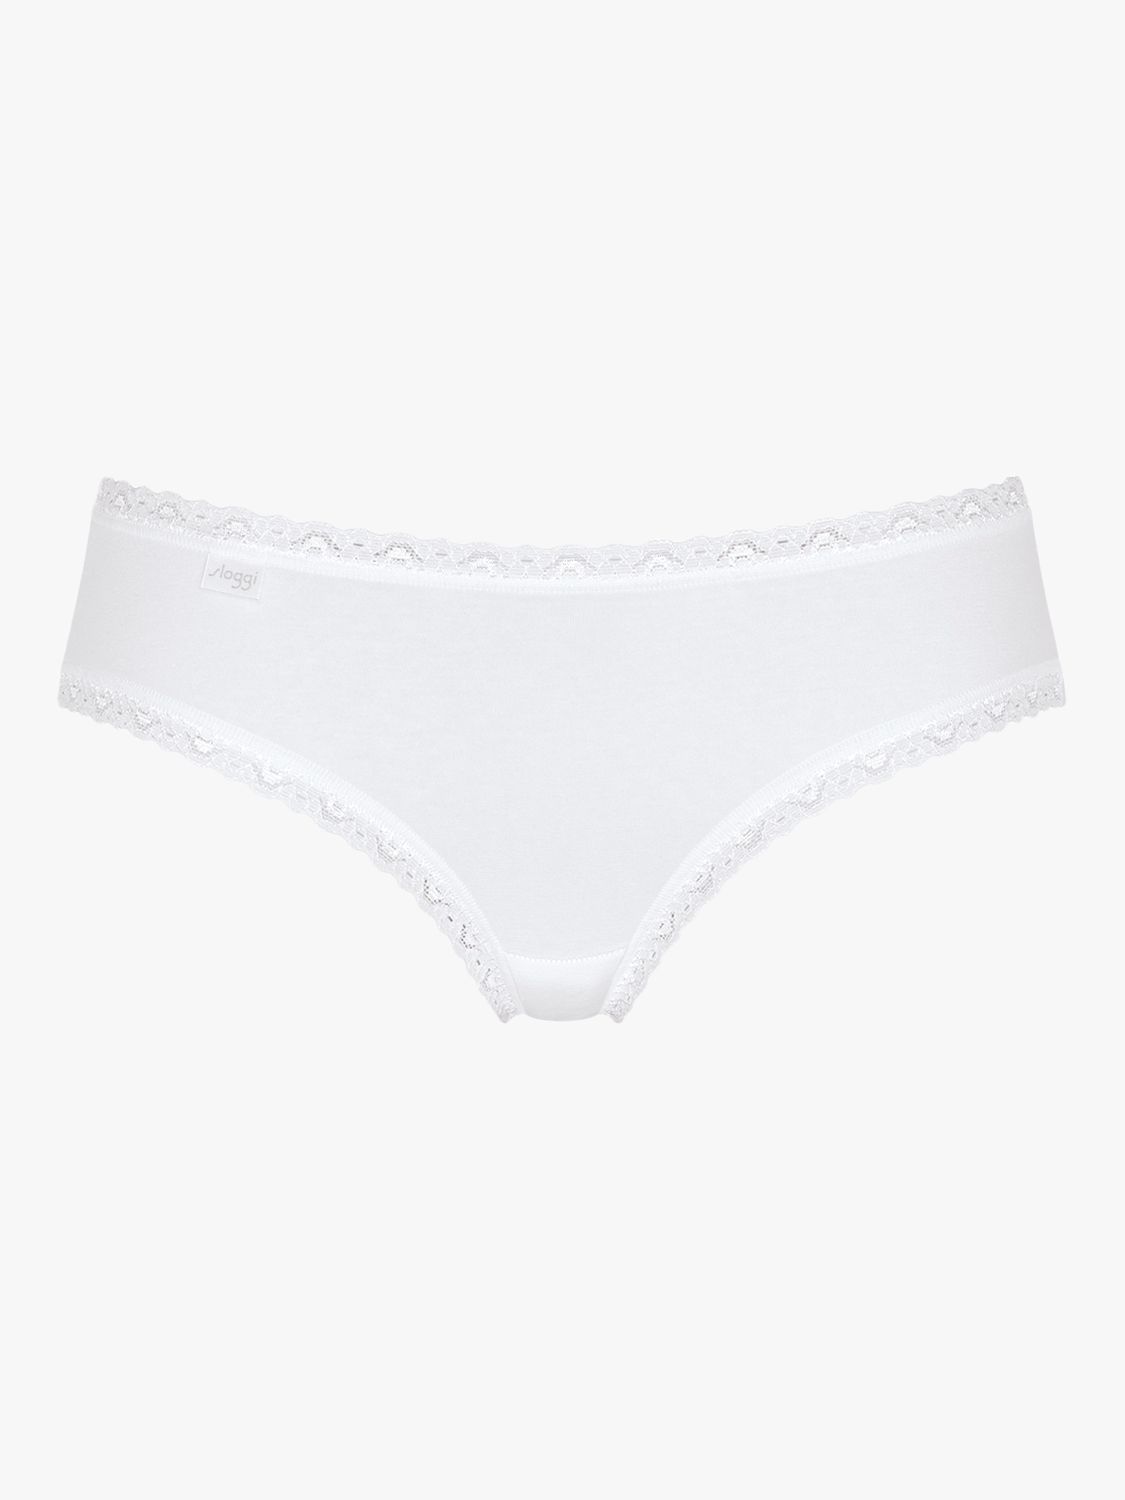 sloggi 24/7 Weekend Hipster Knickers, Pack of 3, White - Light Combination, 16